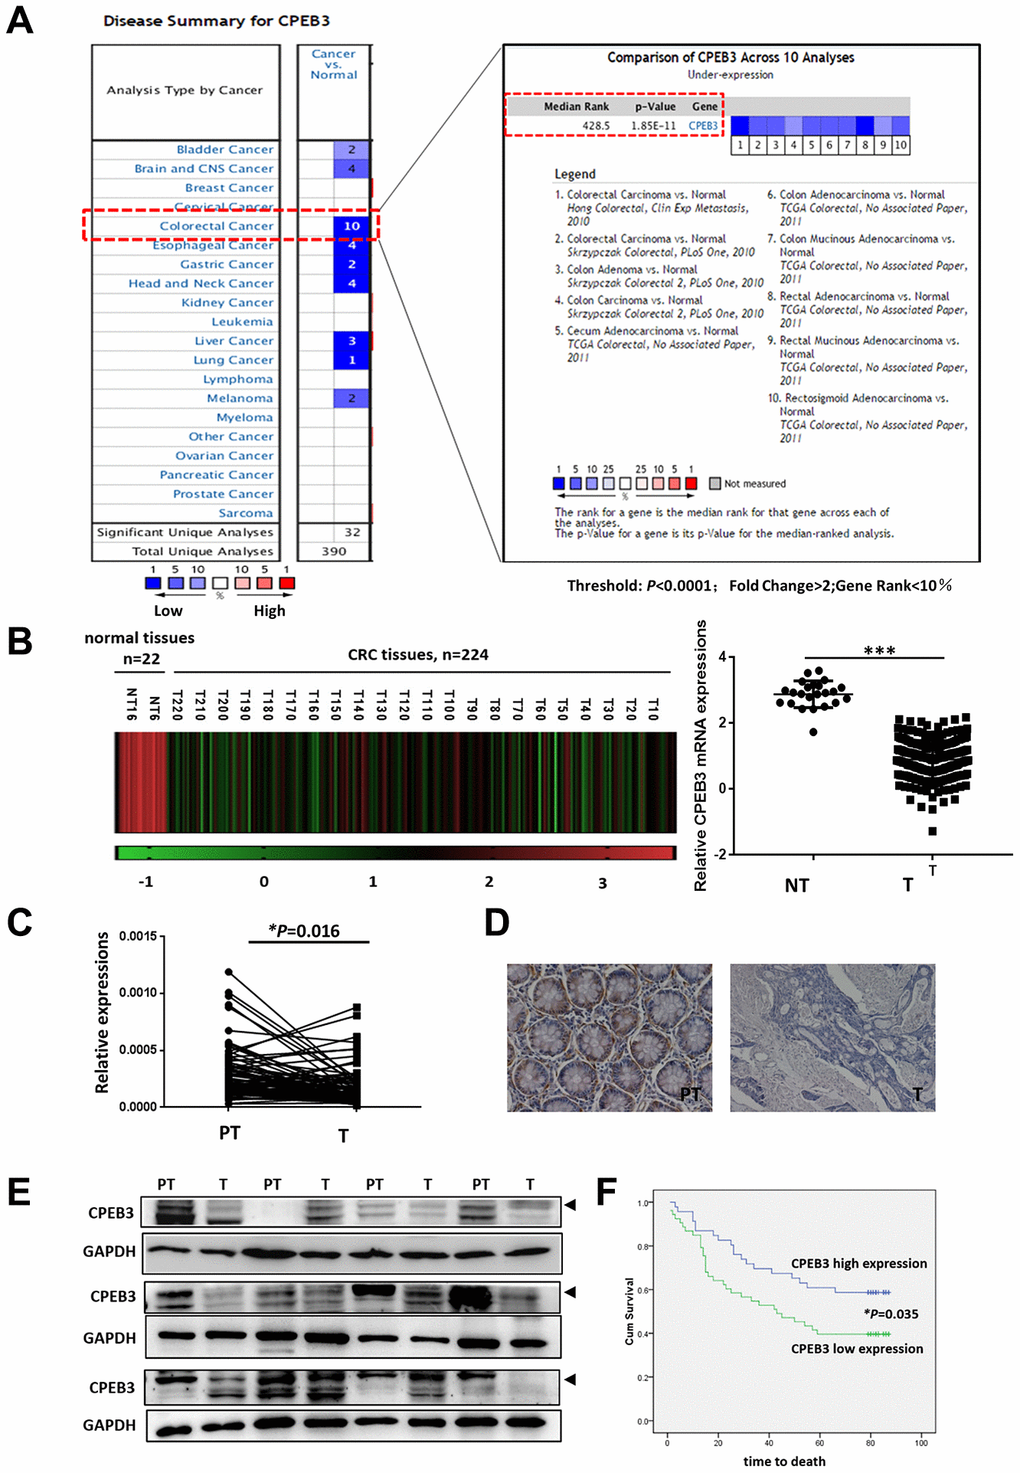 CPEB3 is frequently down-regulated in colorectal cancer tissues. (A) CPEB3 expression in colorectal cancer tissues and other tumors, based on previously published microarray data from the Oncomine database (threshold: P  2; gene rank B) Analysis of CPEB3 gene expression in colorectal cancer and normal tissues in TCGA database (n = 246 [224 vs. 22]). (C) qPCR analysis of CPEB3 mRNA expression in human colorectal cancer tissues and matched peri-tumoral tissues (n = 84). (D) Representative immunohistochemical staining of CPEB3 in human colorectal cancer tissues (right) and matched peri-tumoral tissues (left). (E) Western blotting analysis of CPEB3 in human colorectal cancer tissues and matched peri-tumoral tissues (n = 12). (F) Patients in the CPEB3 low-expression group tended to exhibit shorter OS than patients in the high-expression group by Kaplan-Meier analysis (47 vs. 62 months; P = 0.035).